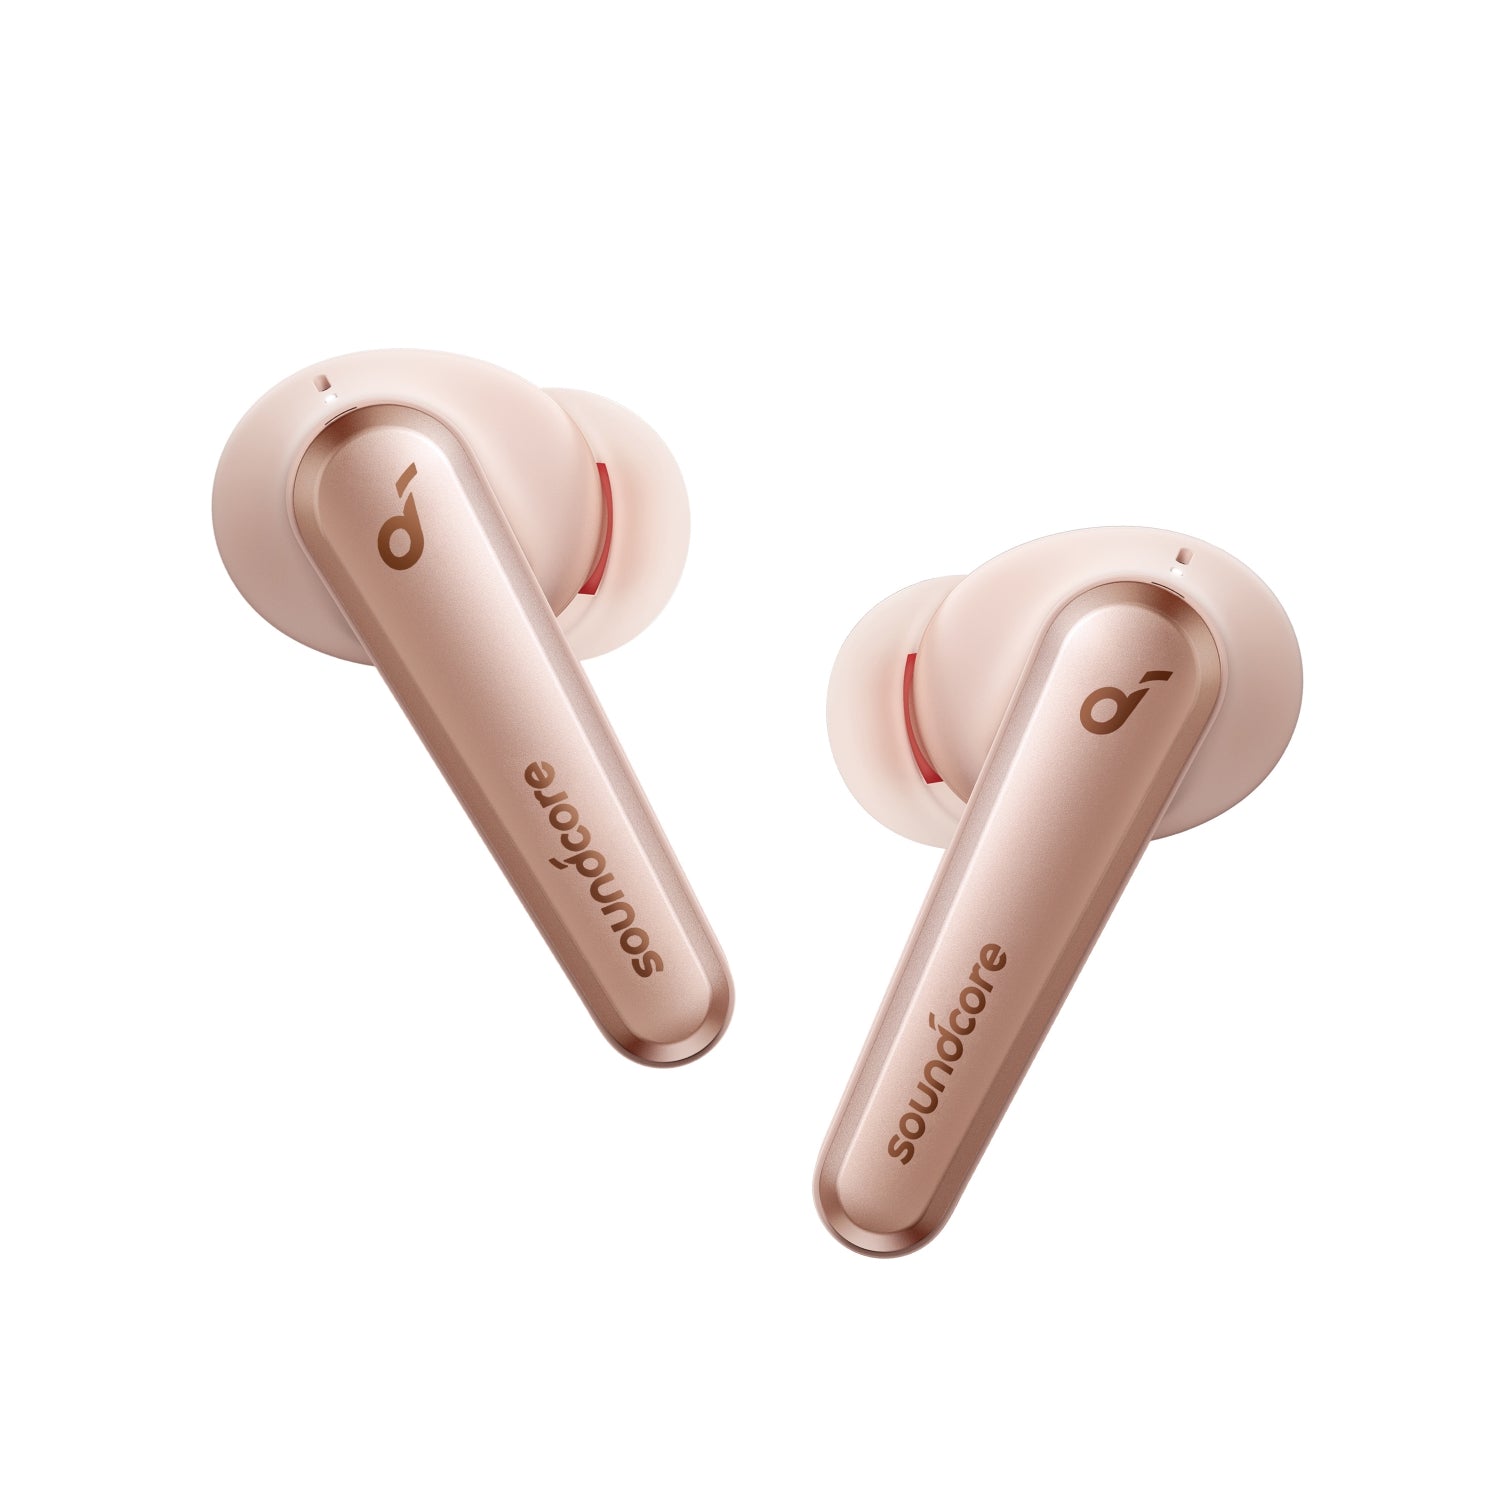 Best ANC Earbuds - soundcore CA